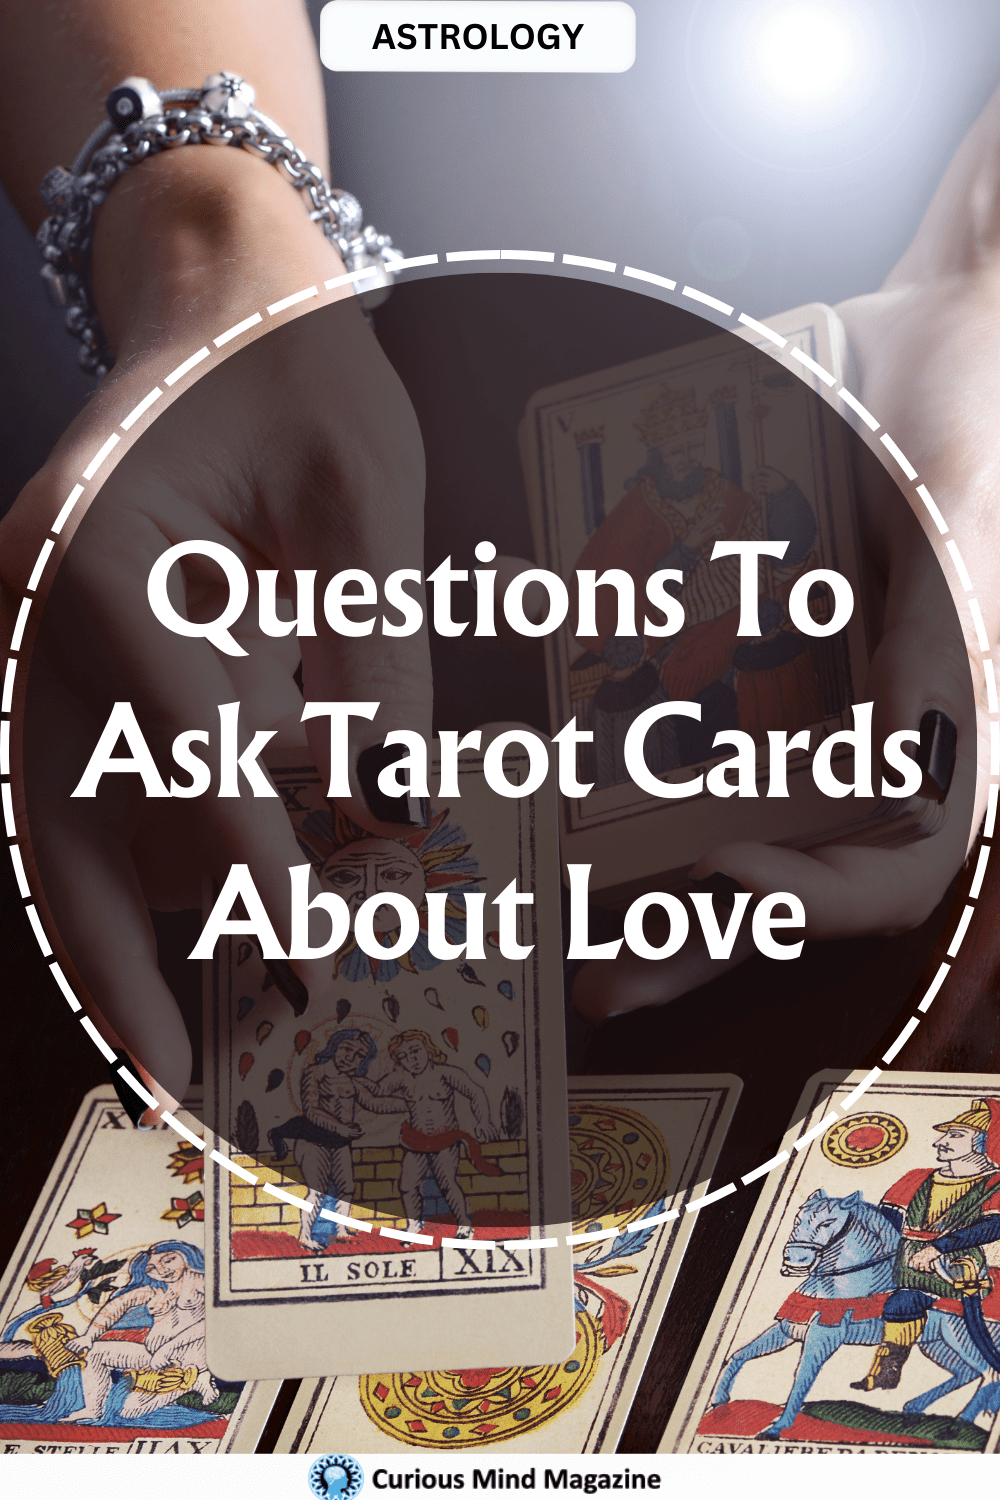 Questions To Ask Tarot Cards About Love